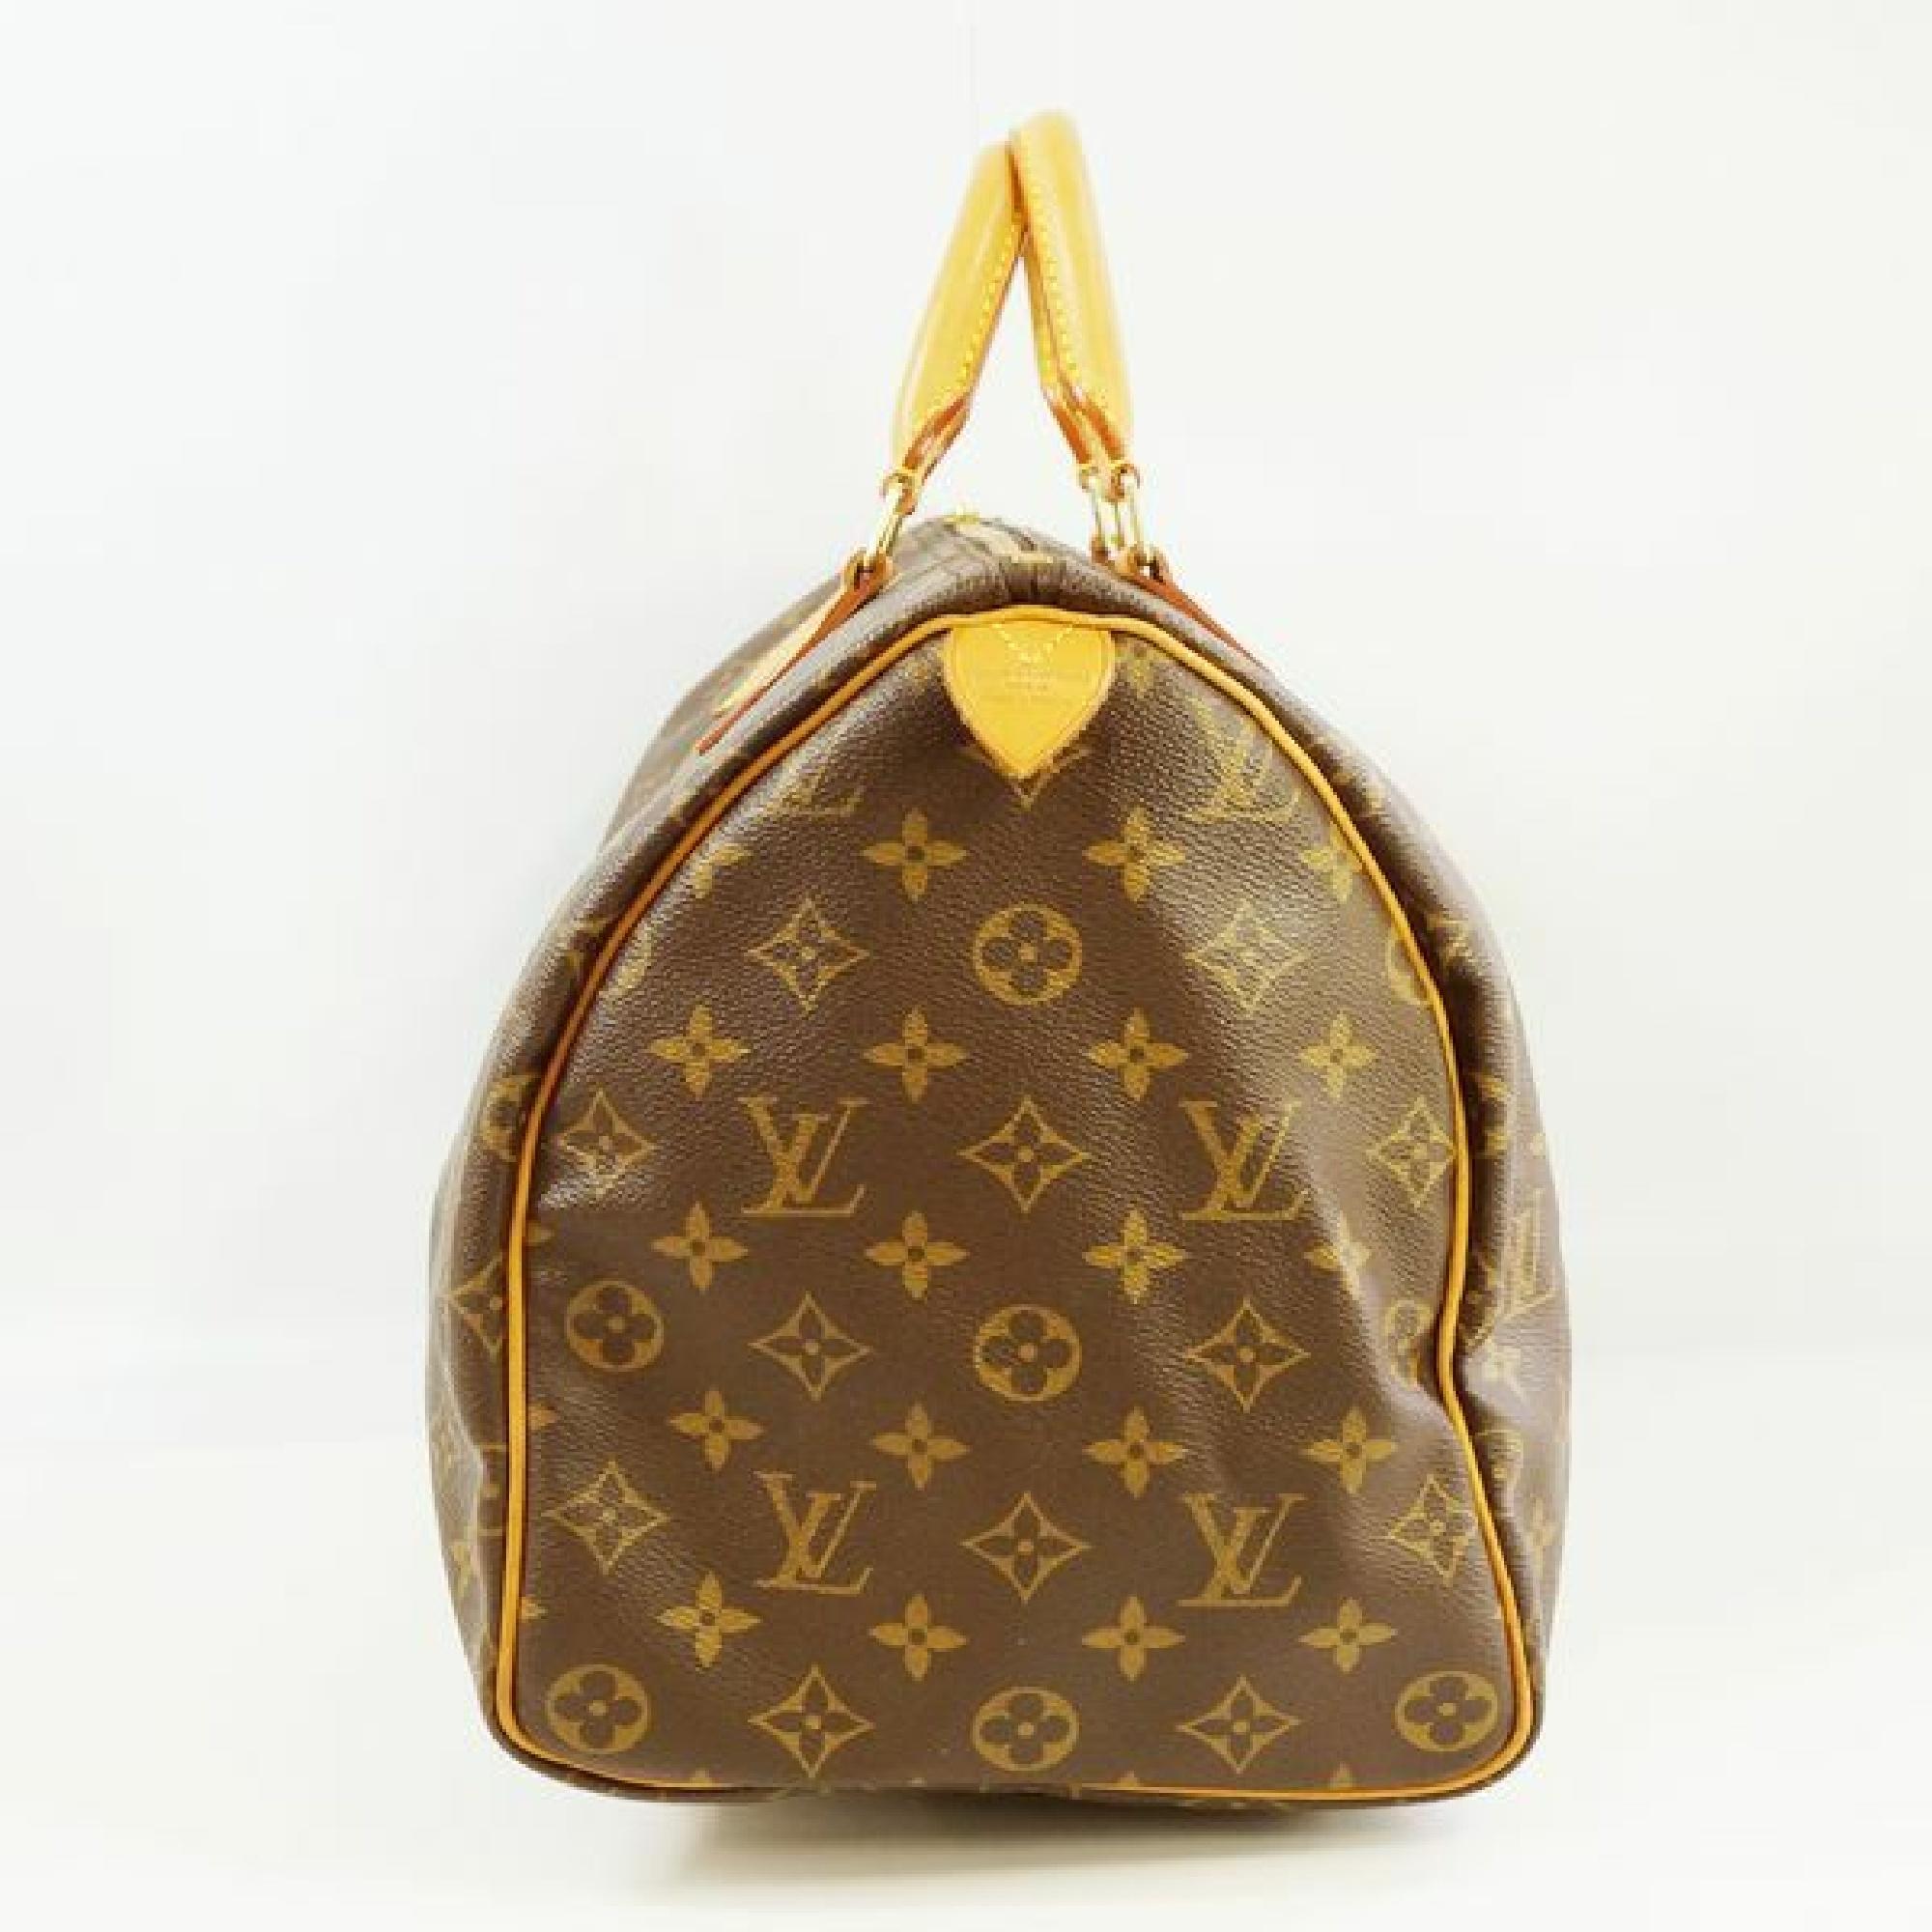 An authentic LOUIS VUITTON Speedy 40 Womens Boston bag M41522 The outside material is Monogram canvas. The pattern is Speedy40. This item is Contemporary. The year of manufacture would be 2001.
Rank
AB signs of wear (Small)
Used goods in good